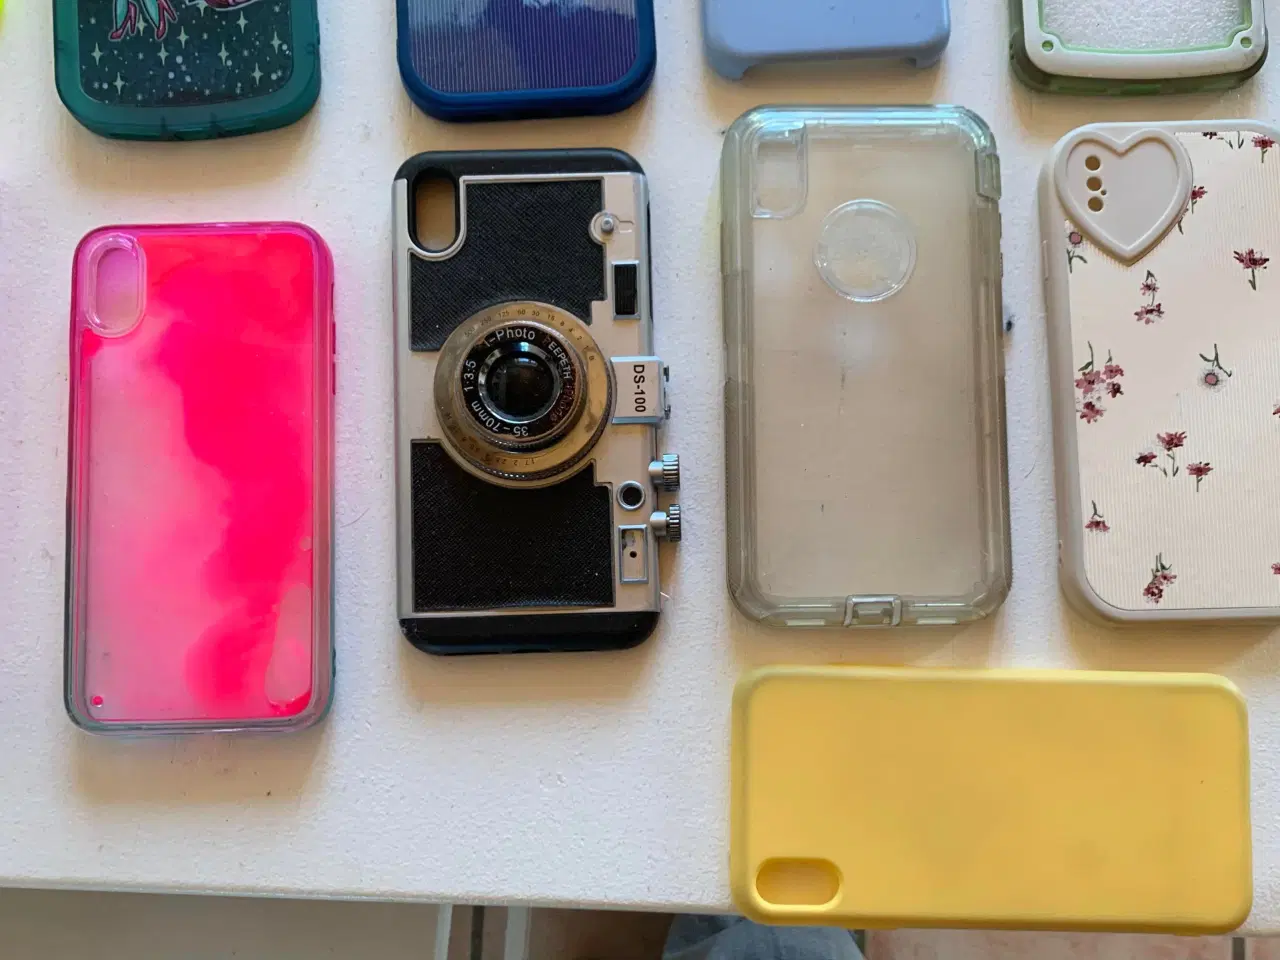 Billede 5 - Iphone xs Max covers